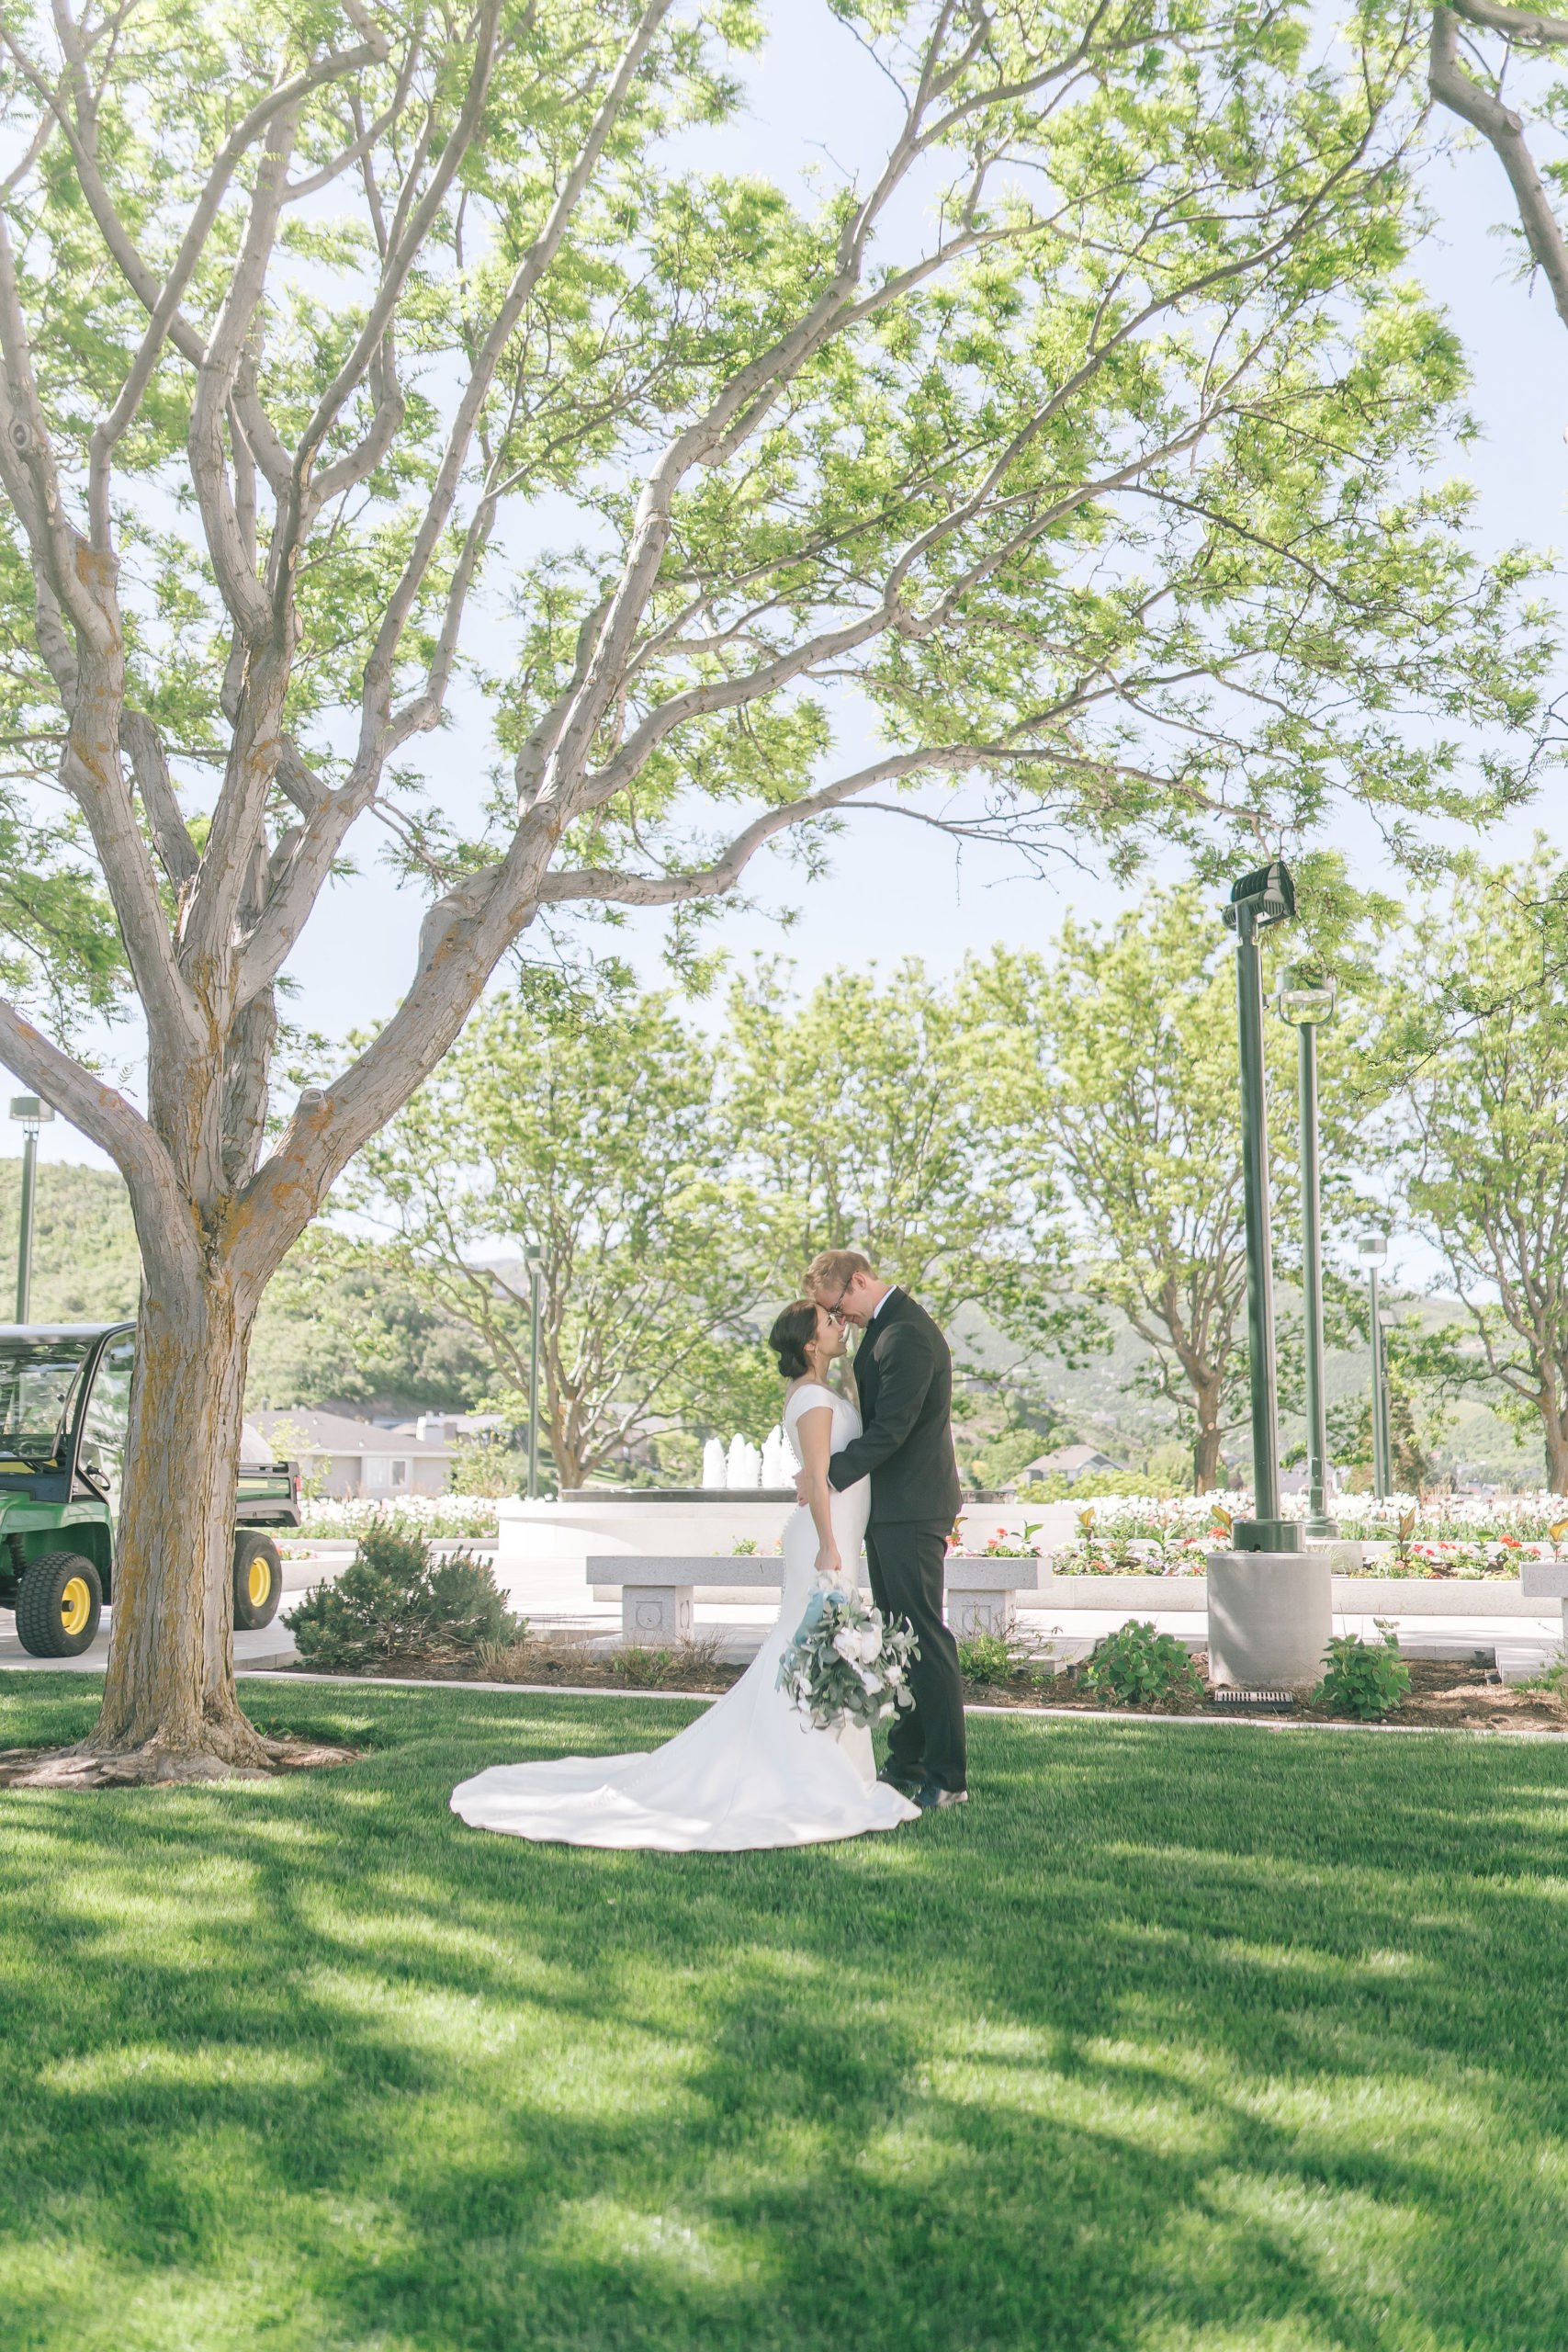 simple satin wedding dresses in trend with bride and groom kissing each other in a green garden for their destination wedding captured by best Knoxville wedding photographer